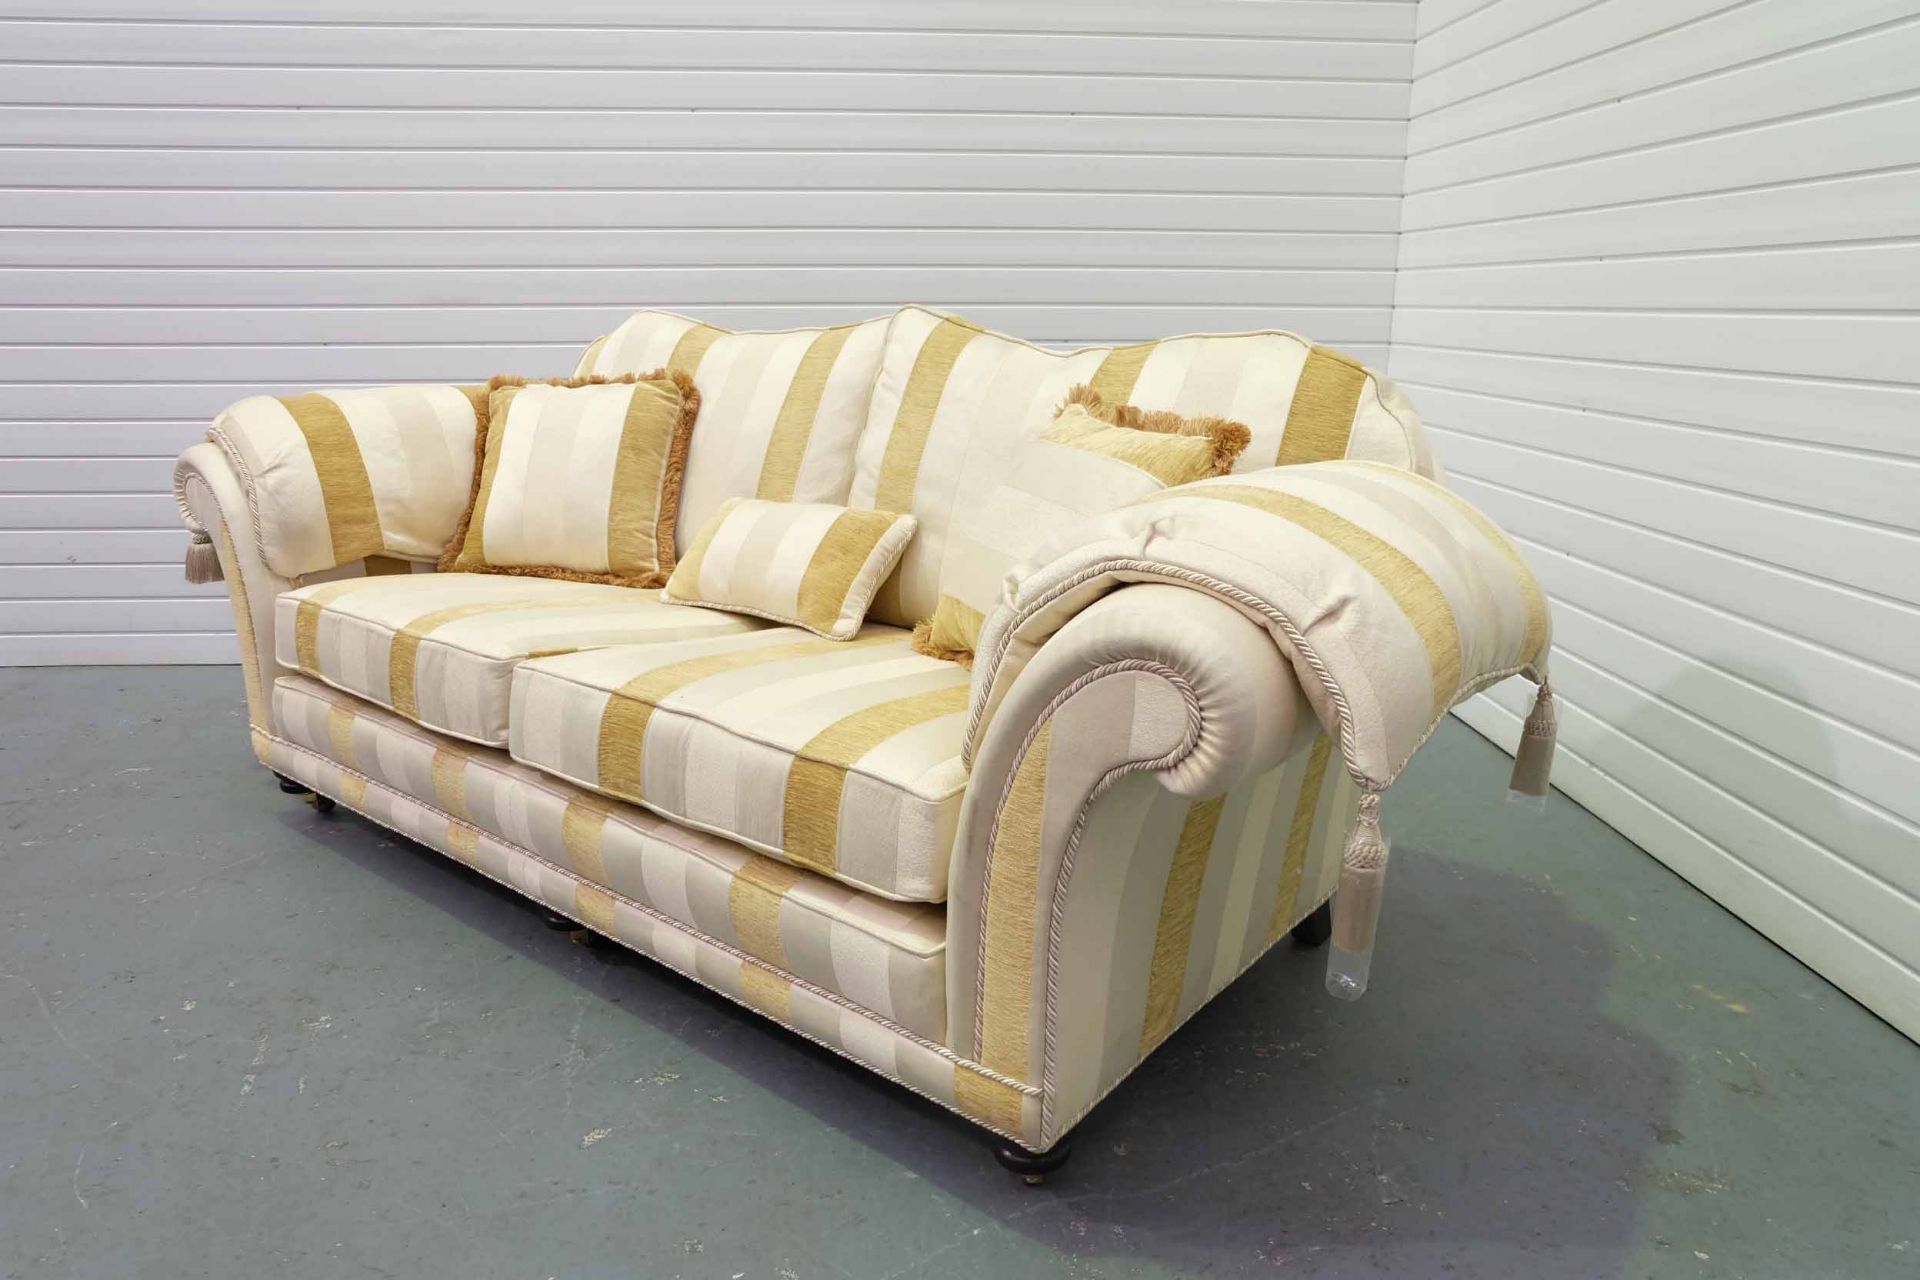 Steed Upholstery 'Keddleston' Range Fully Handmade 3 Seater Sofa. With Castor Wheels to the Front of - Image 2 of 4